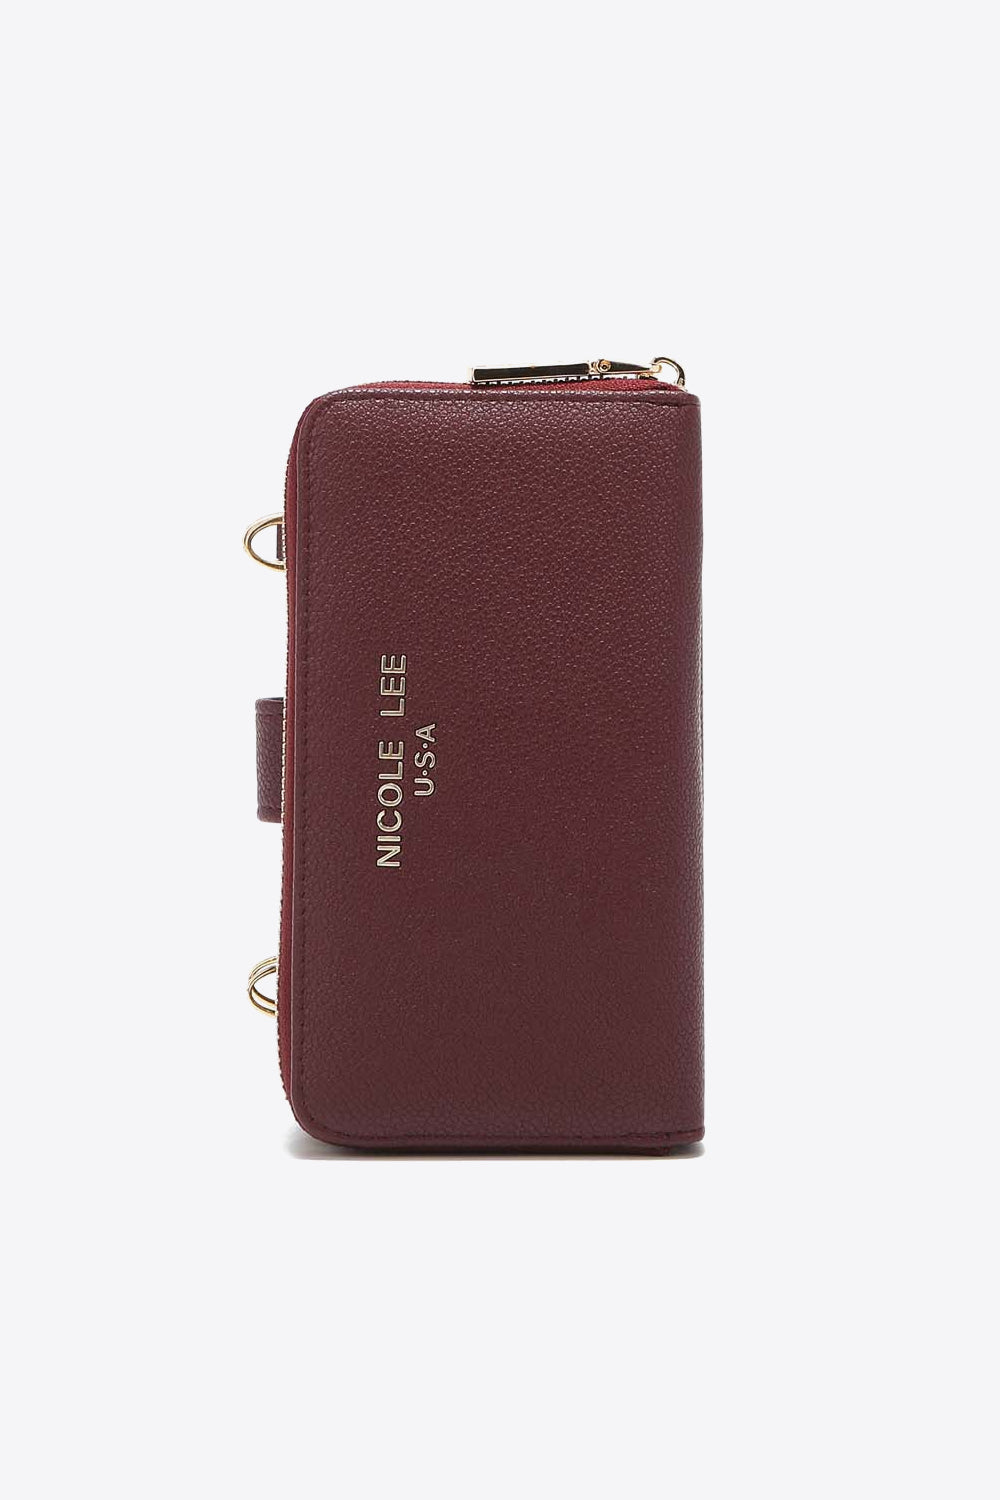 Crossbody Phone Case Wallet Set from Nicole Lee USA